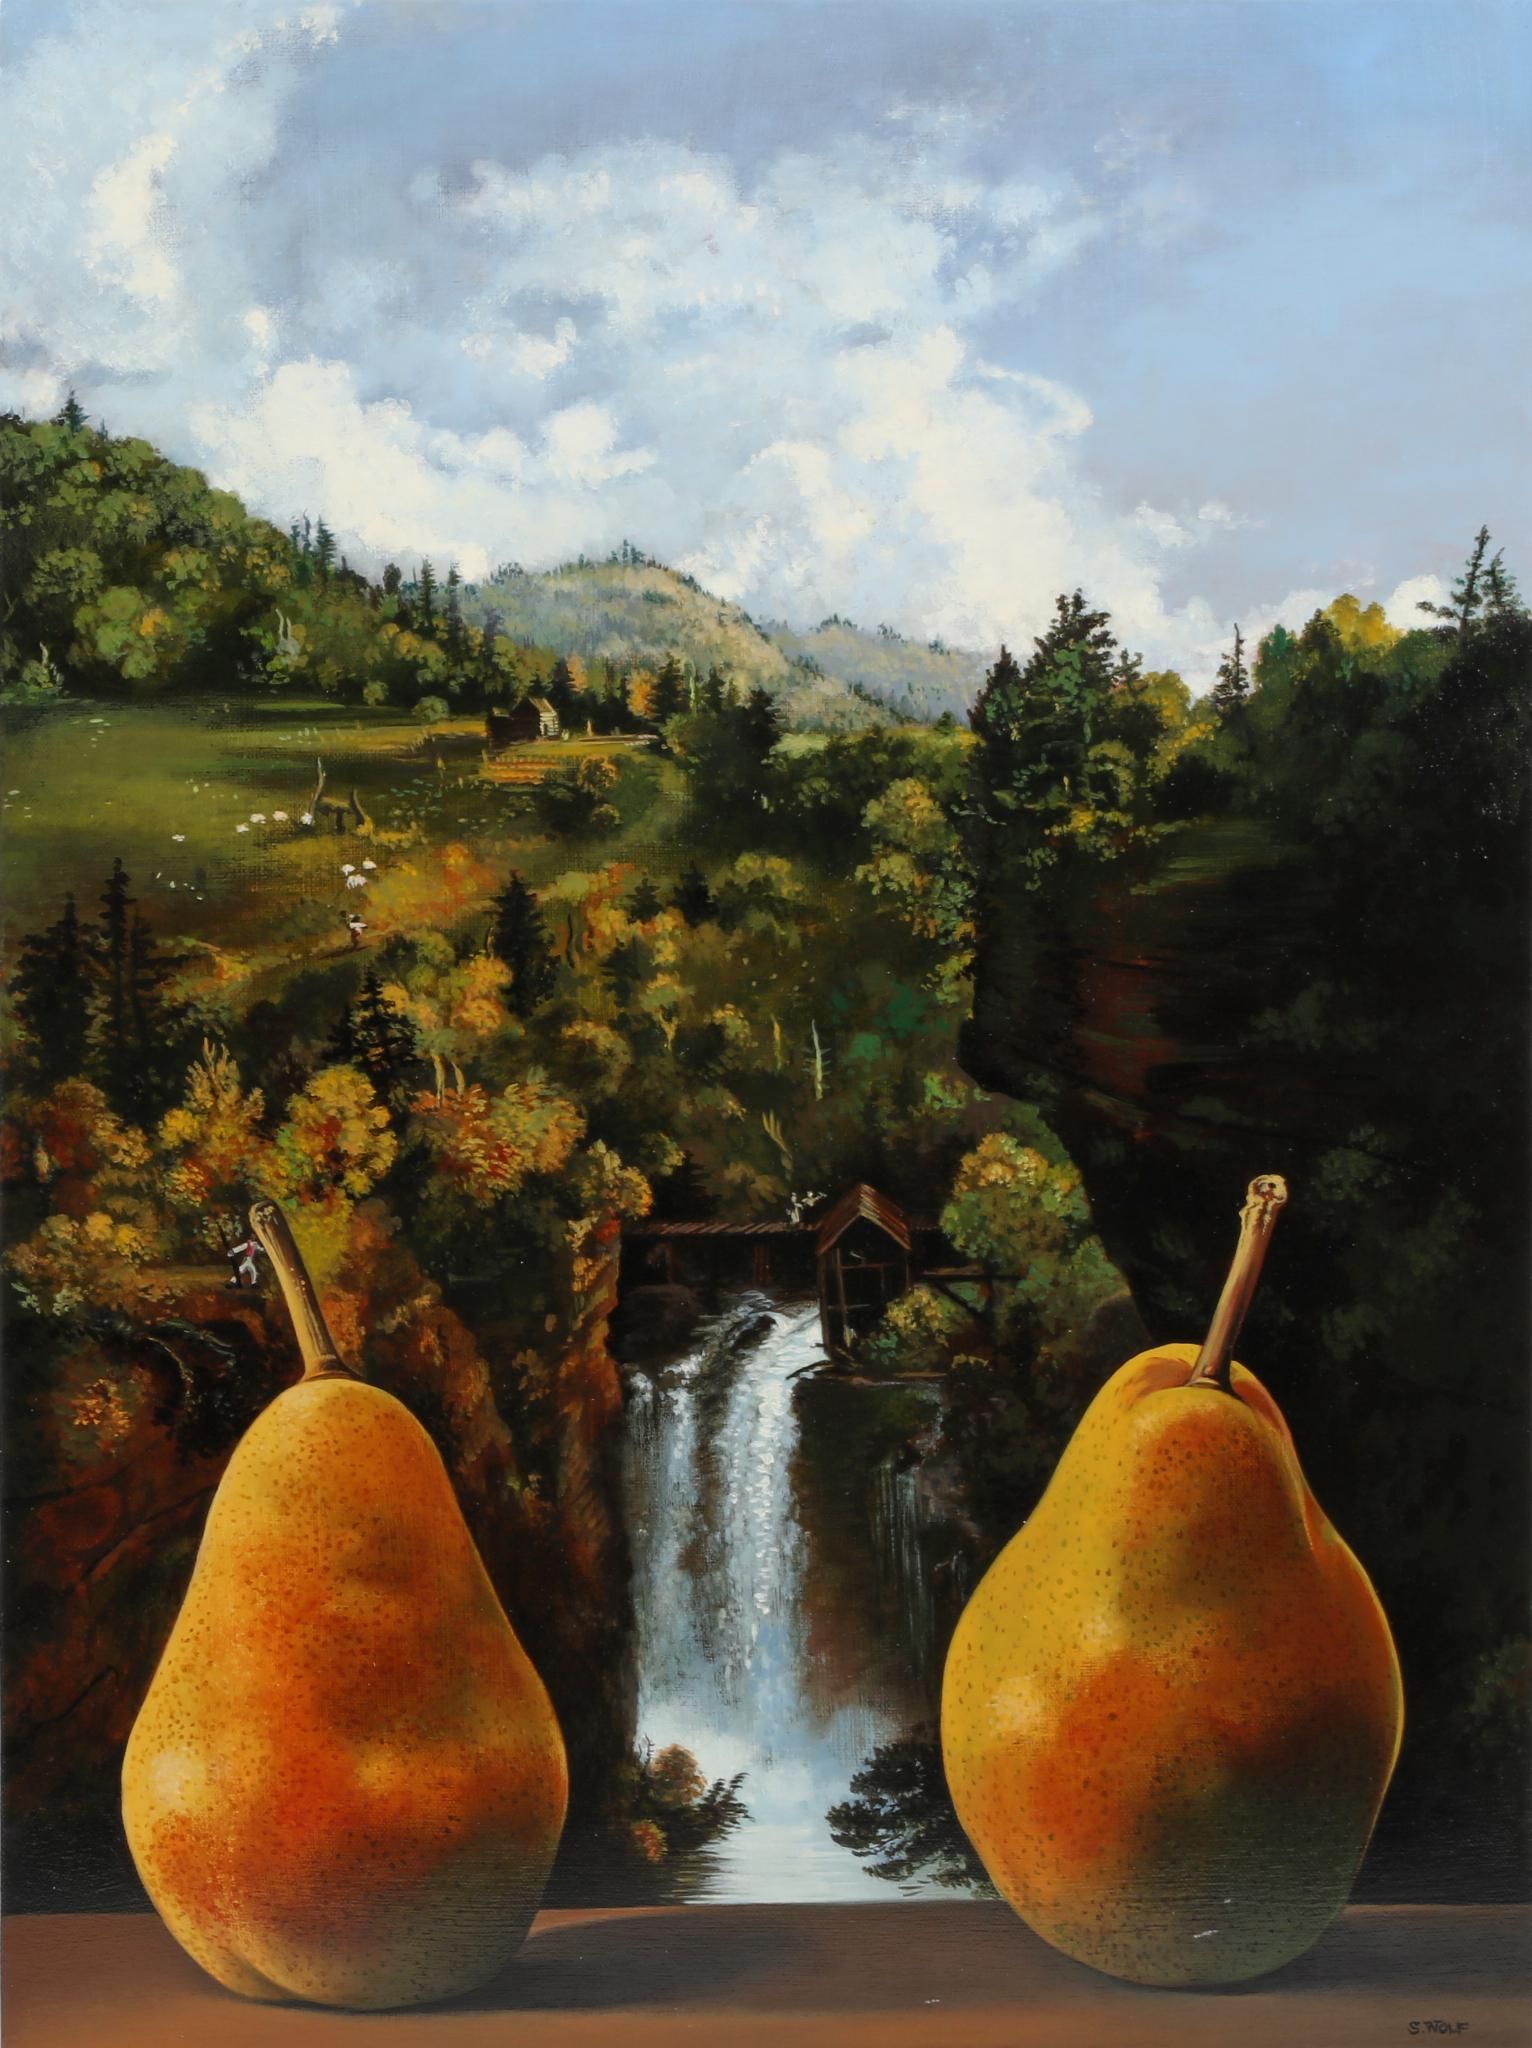 SHERRIE WOLF, TWO PEARS IN A LANDSCAPESherrie